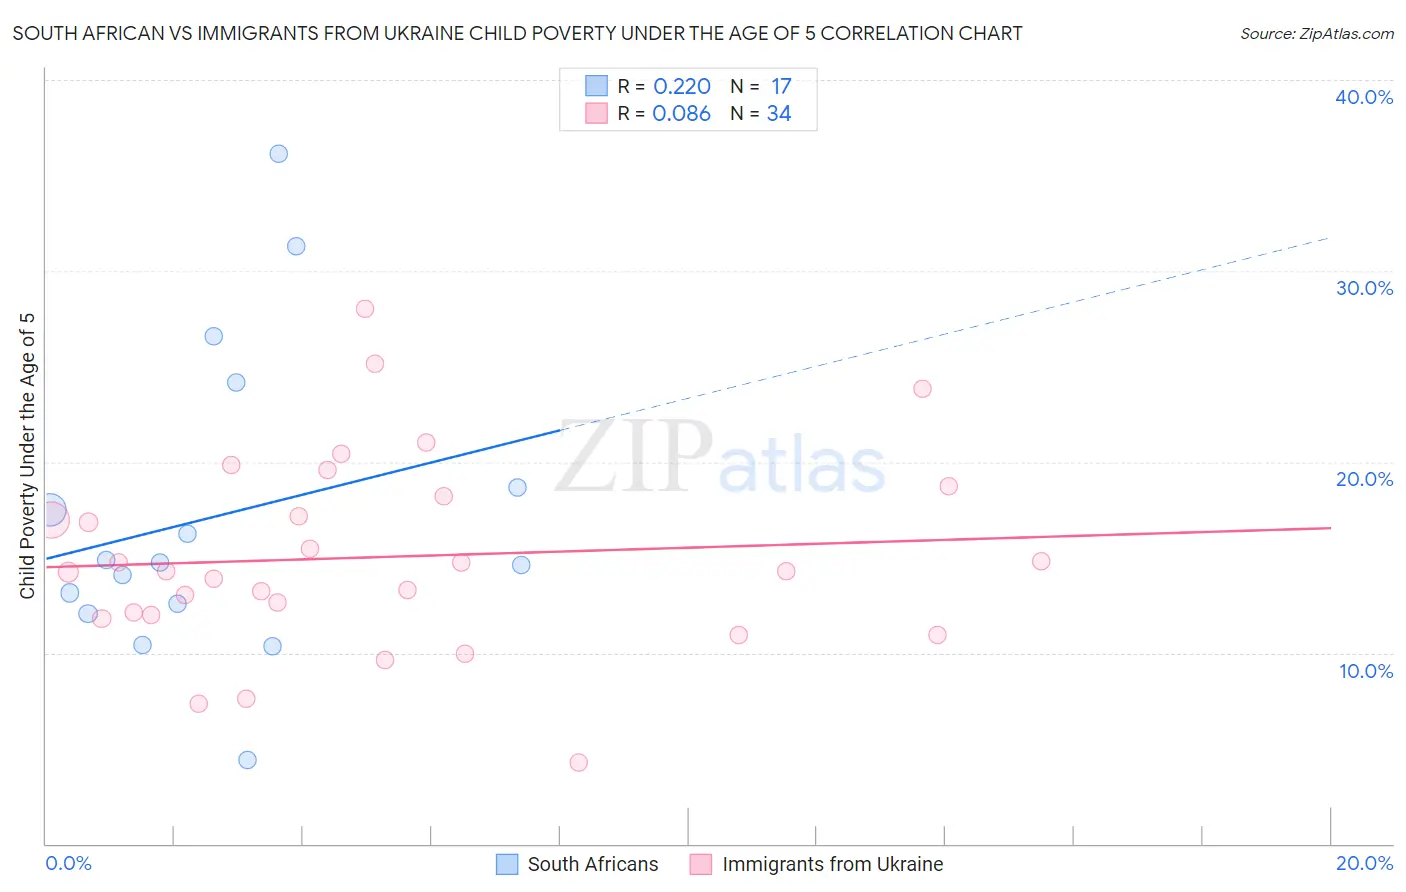 South African vs Immigrants from Ukraine Child Poverty Under the Age of 5